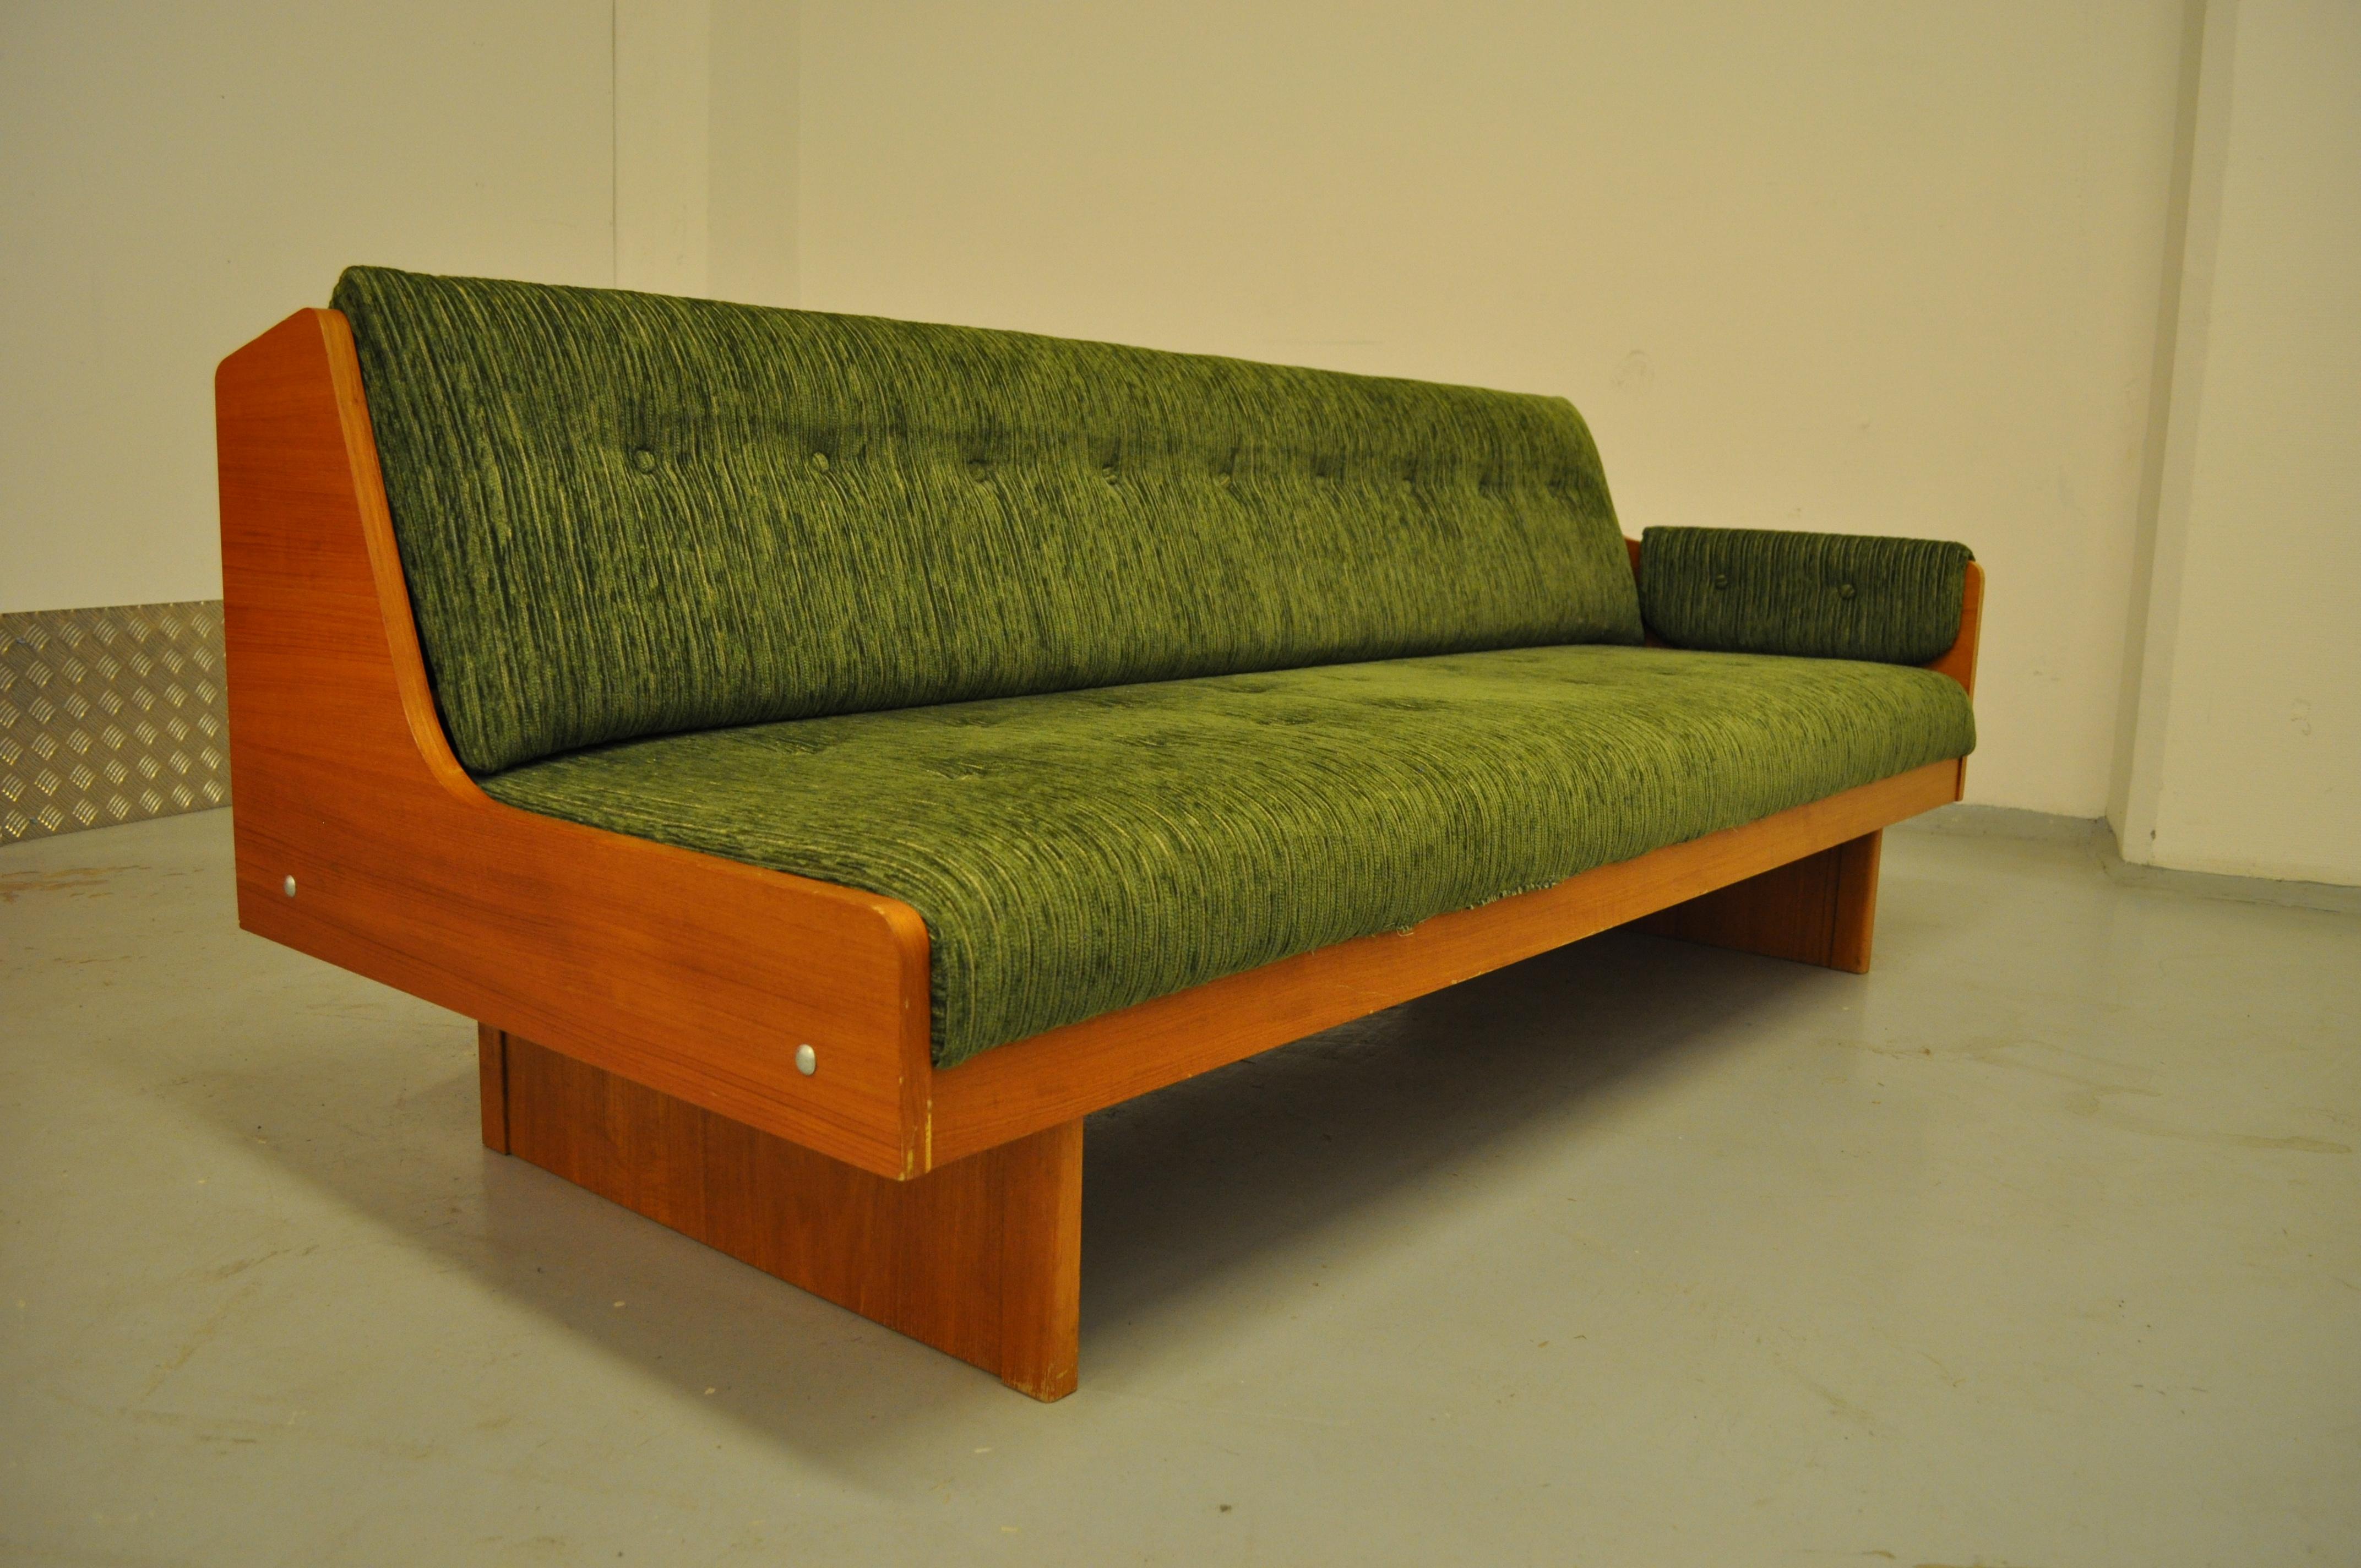 Pair of Scandinavian sofa beds in teak and velvet fleeces based on a modernist base that seems to make the seat levitate. The back of each sofa can be raise to make room for a bench / bed, its original sheet and quilt.